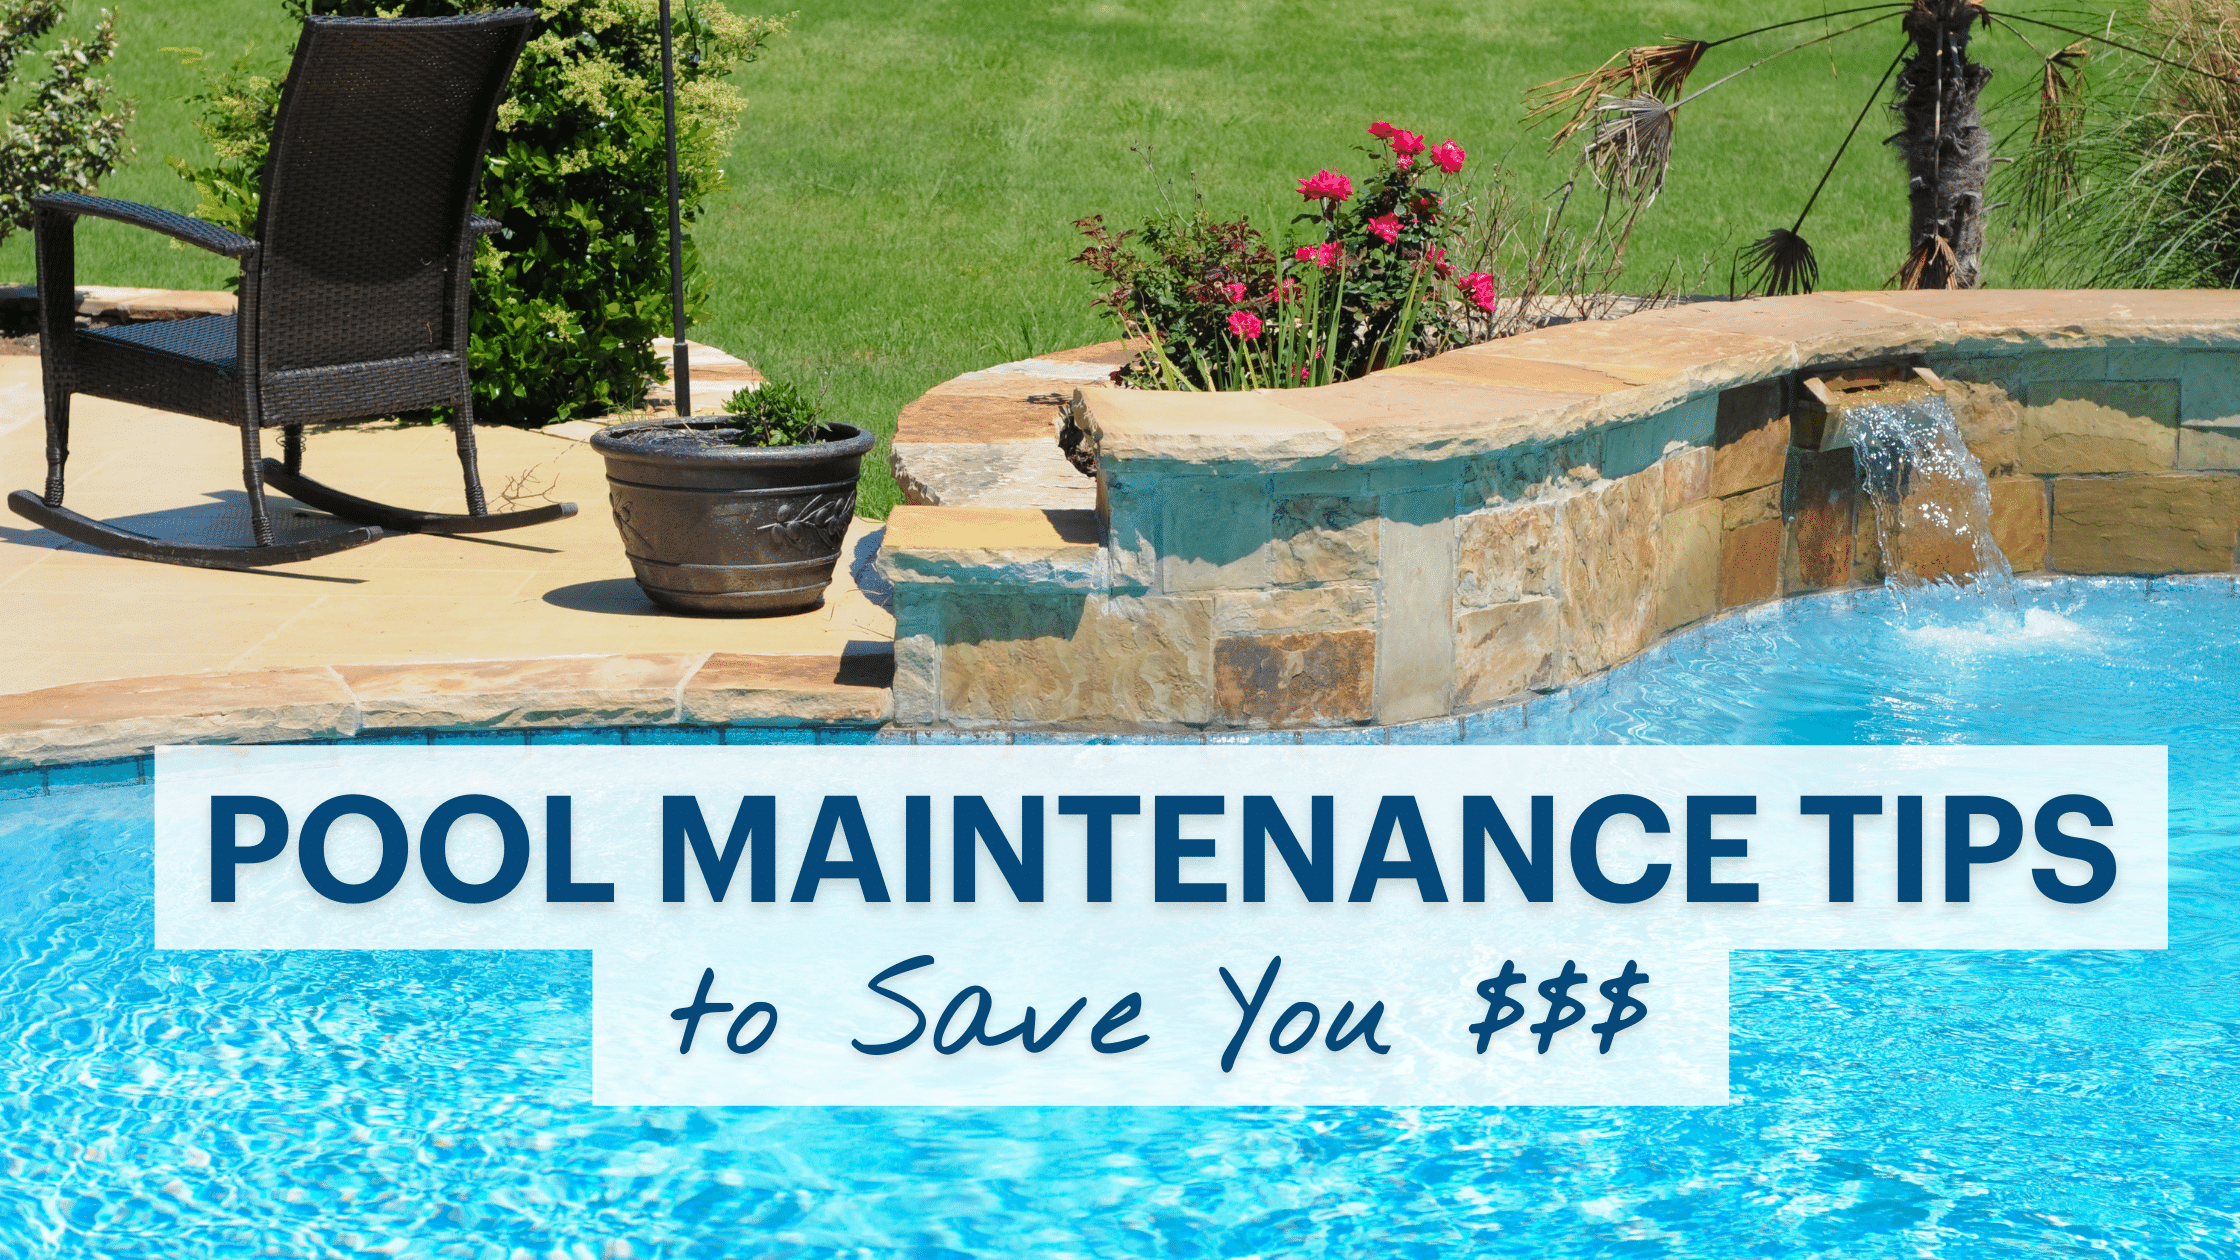 Pool Maintenance Tips to Save You Money